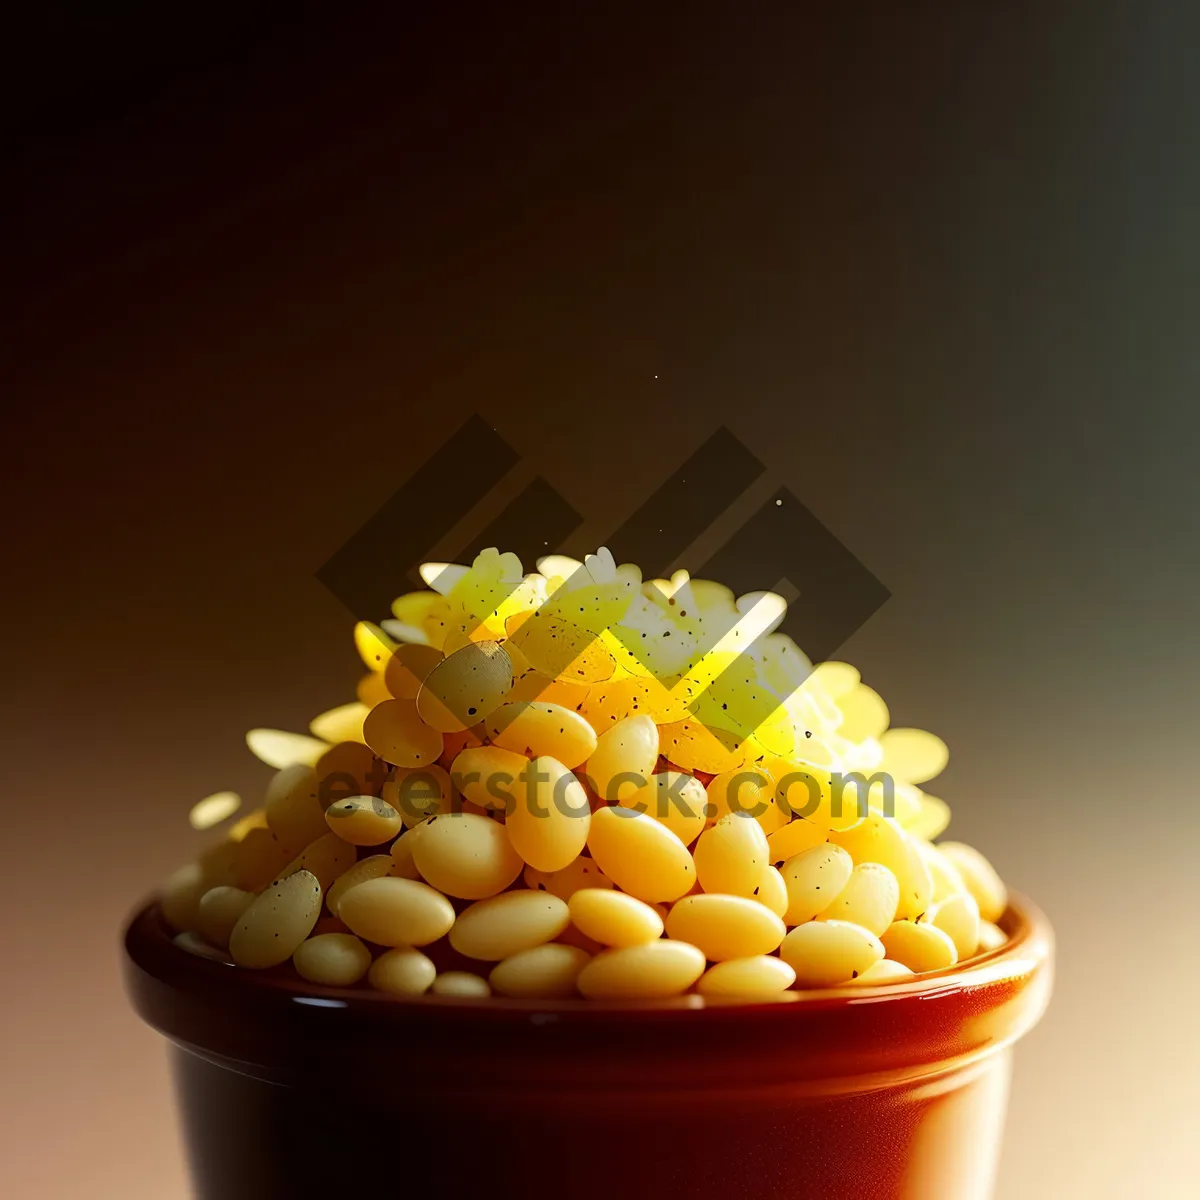 Picture of Fresh and Nutritious Yellow Corn Kernel - Healthy Vegetarian Seed